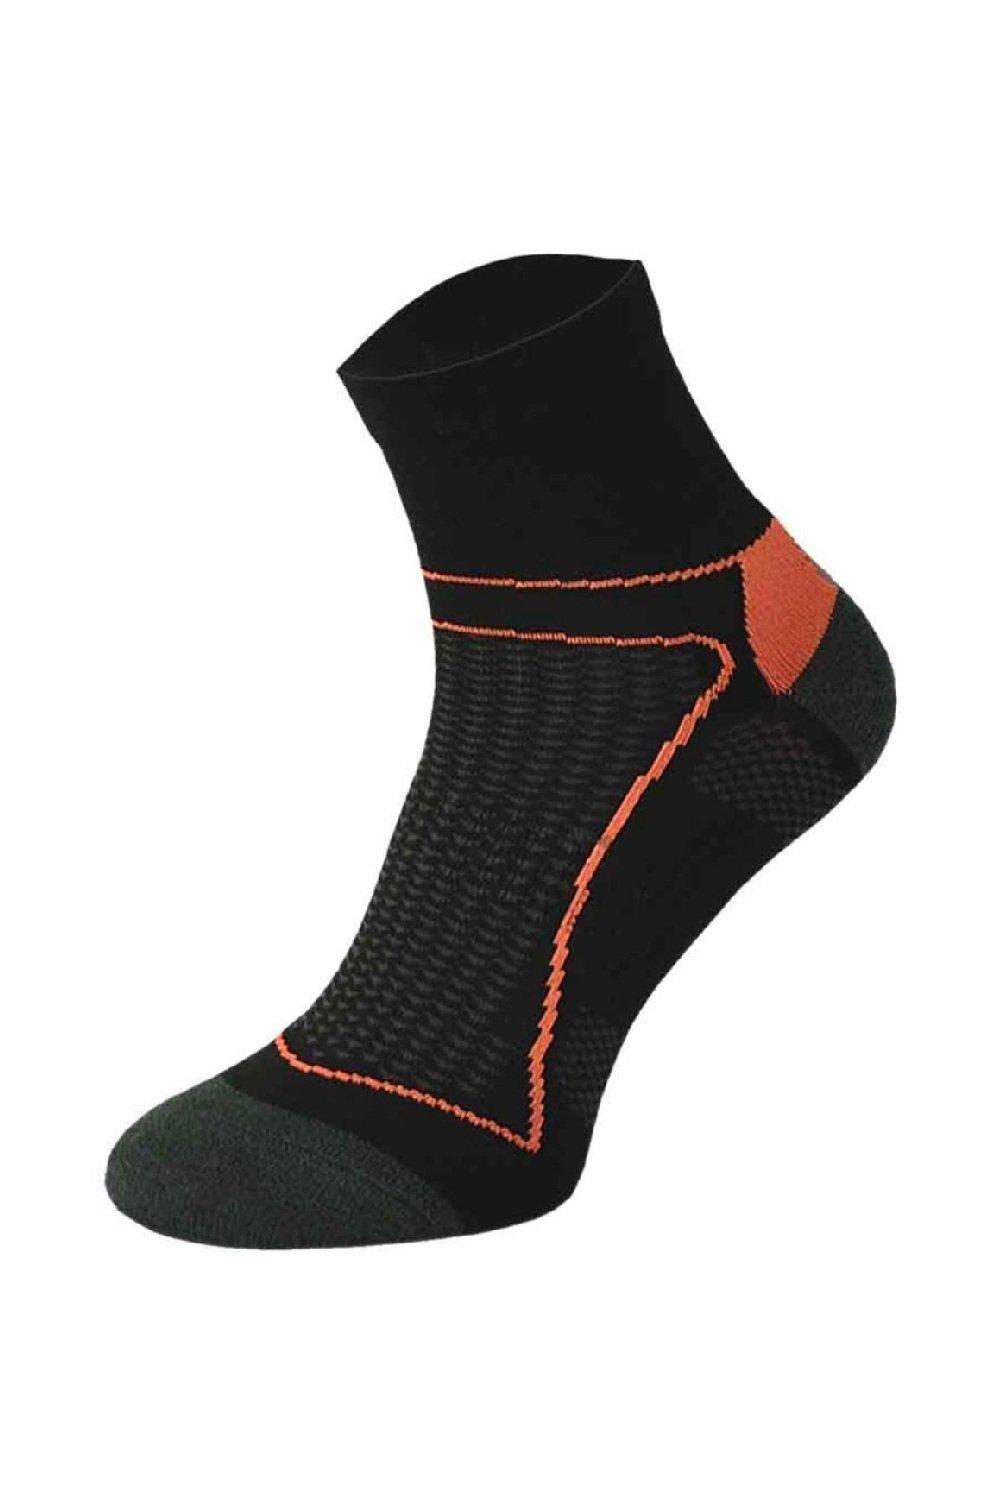 High Vis Bright Low Cut Ankle Neon Cycling Socks